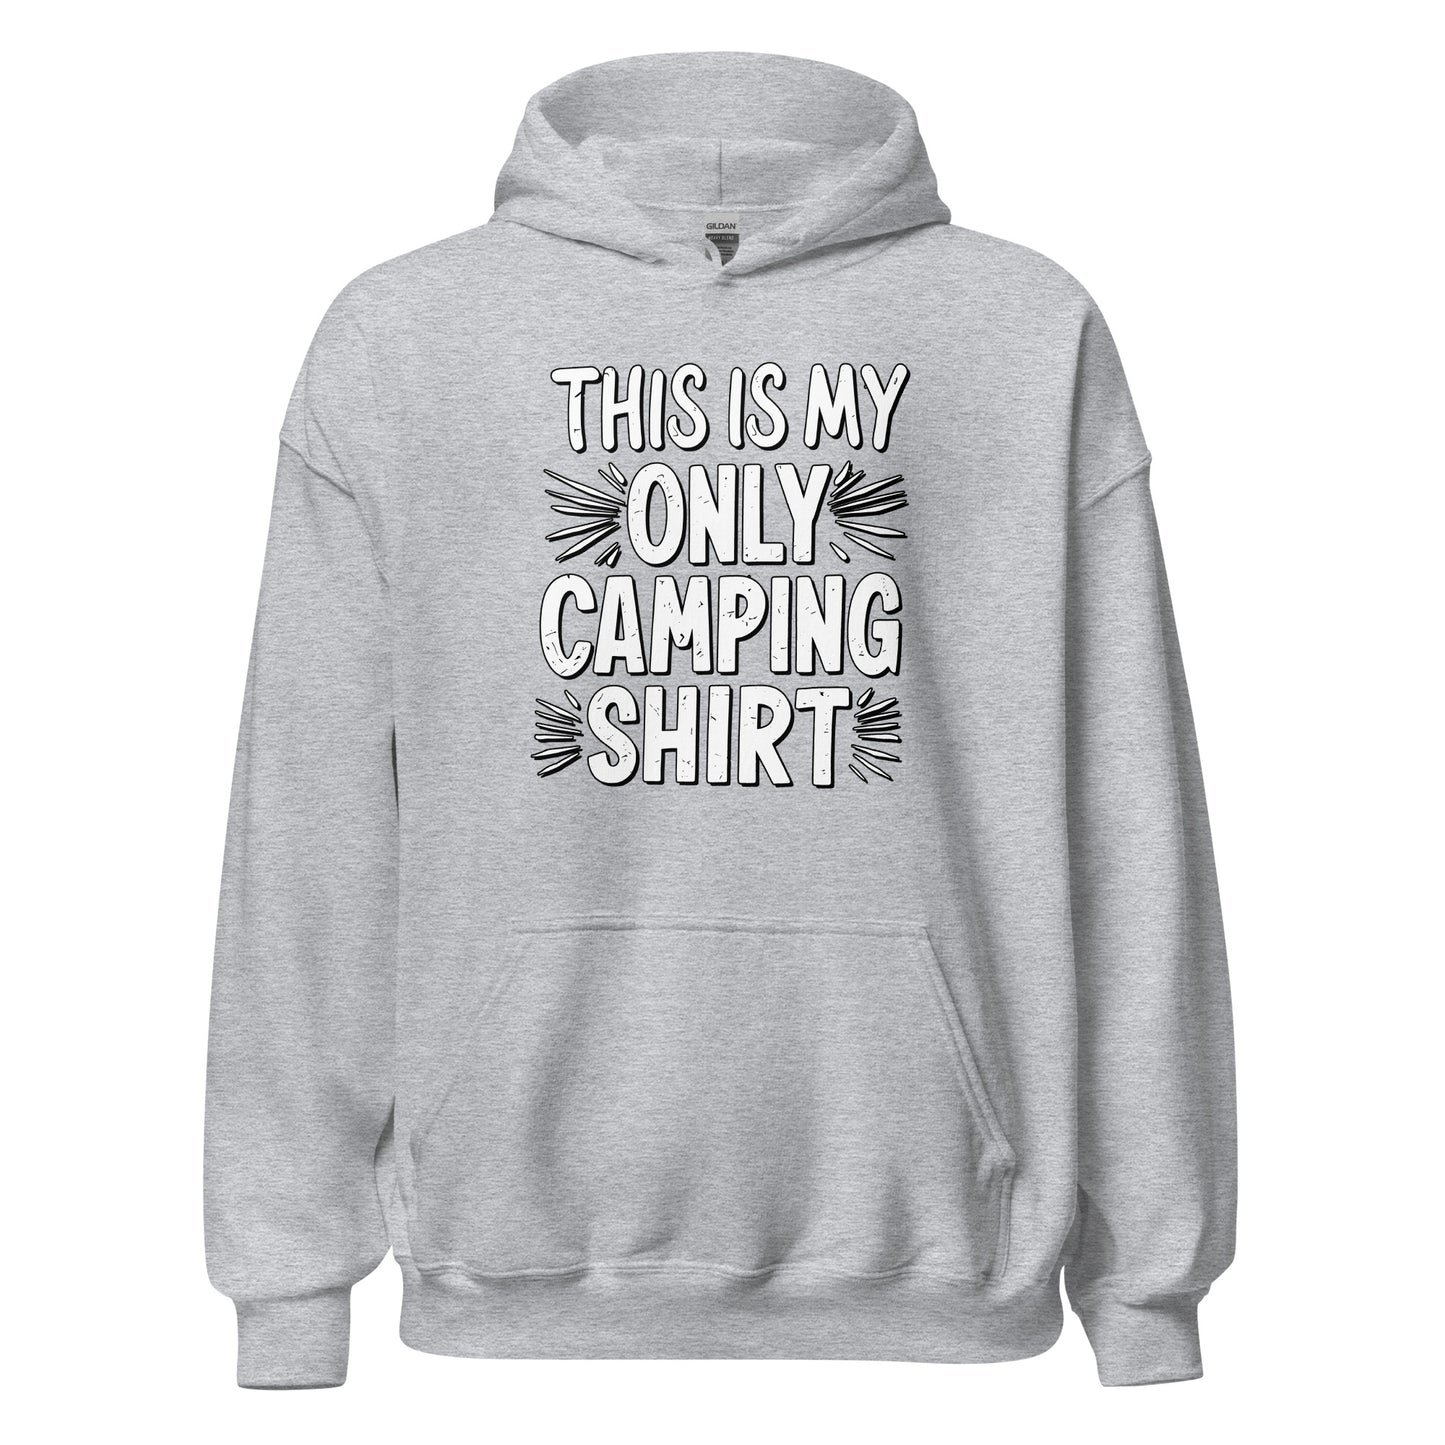 This is my only camping t-shirt hoodie printed by Whistler Shirts